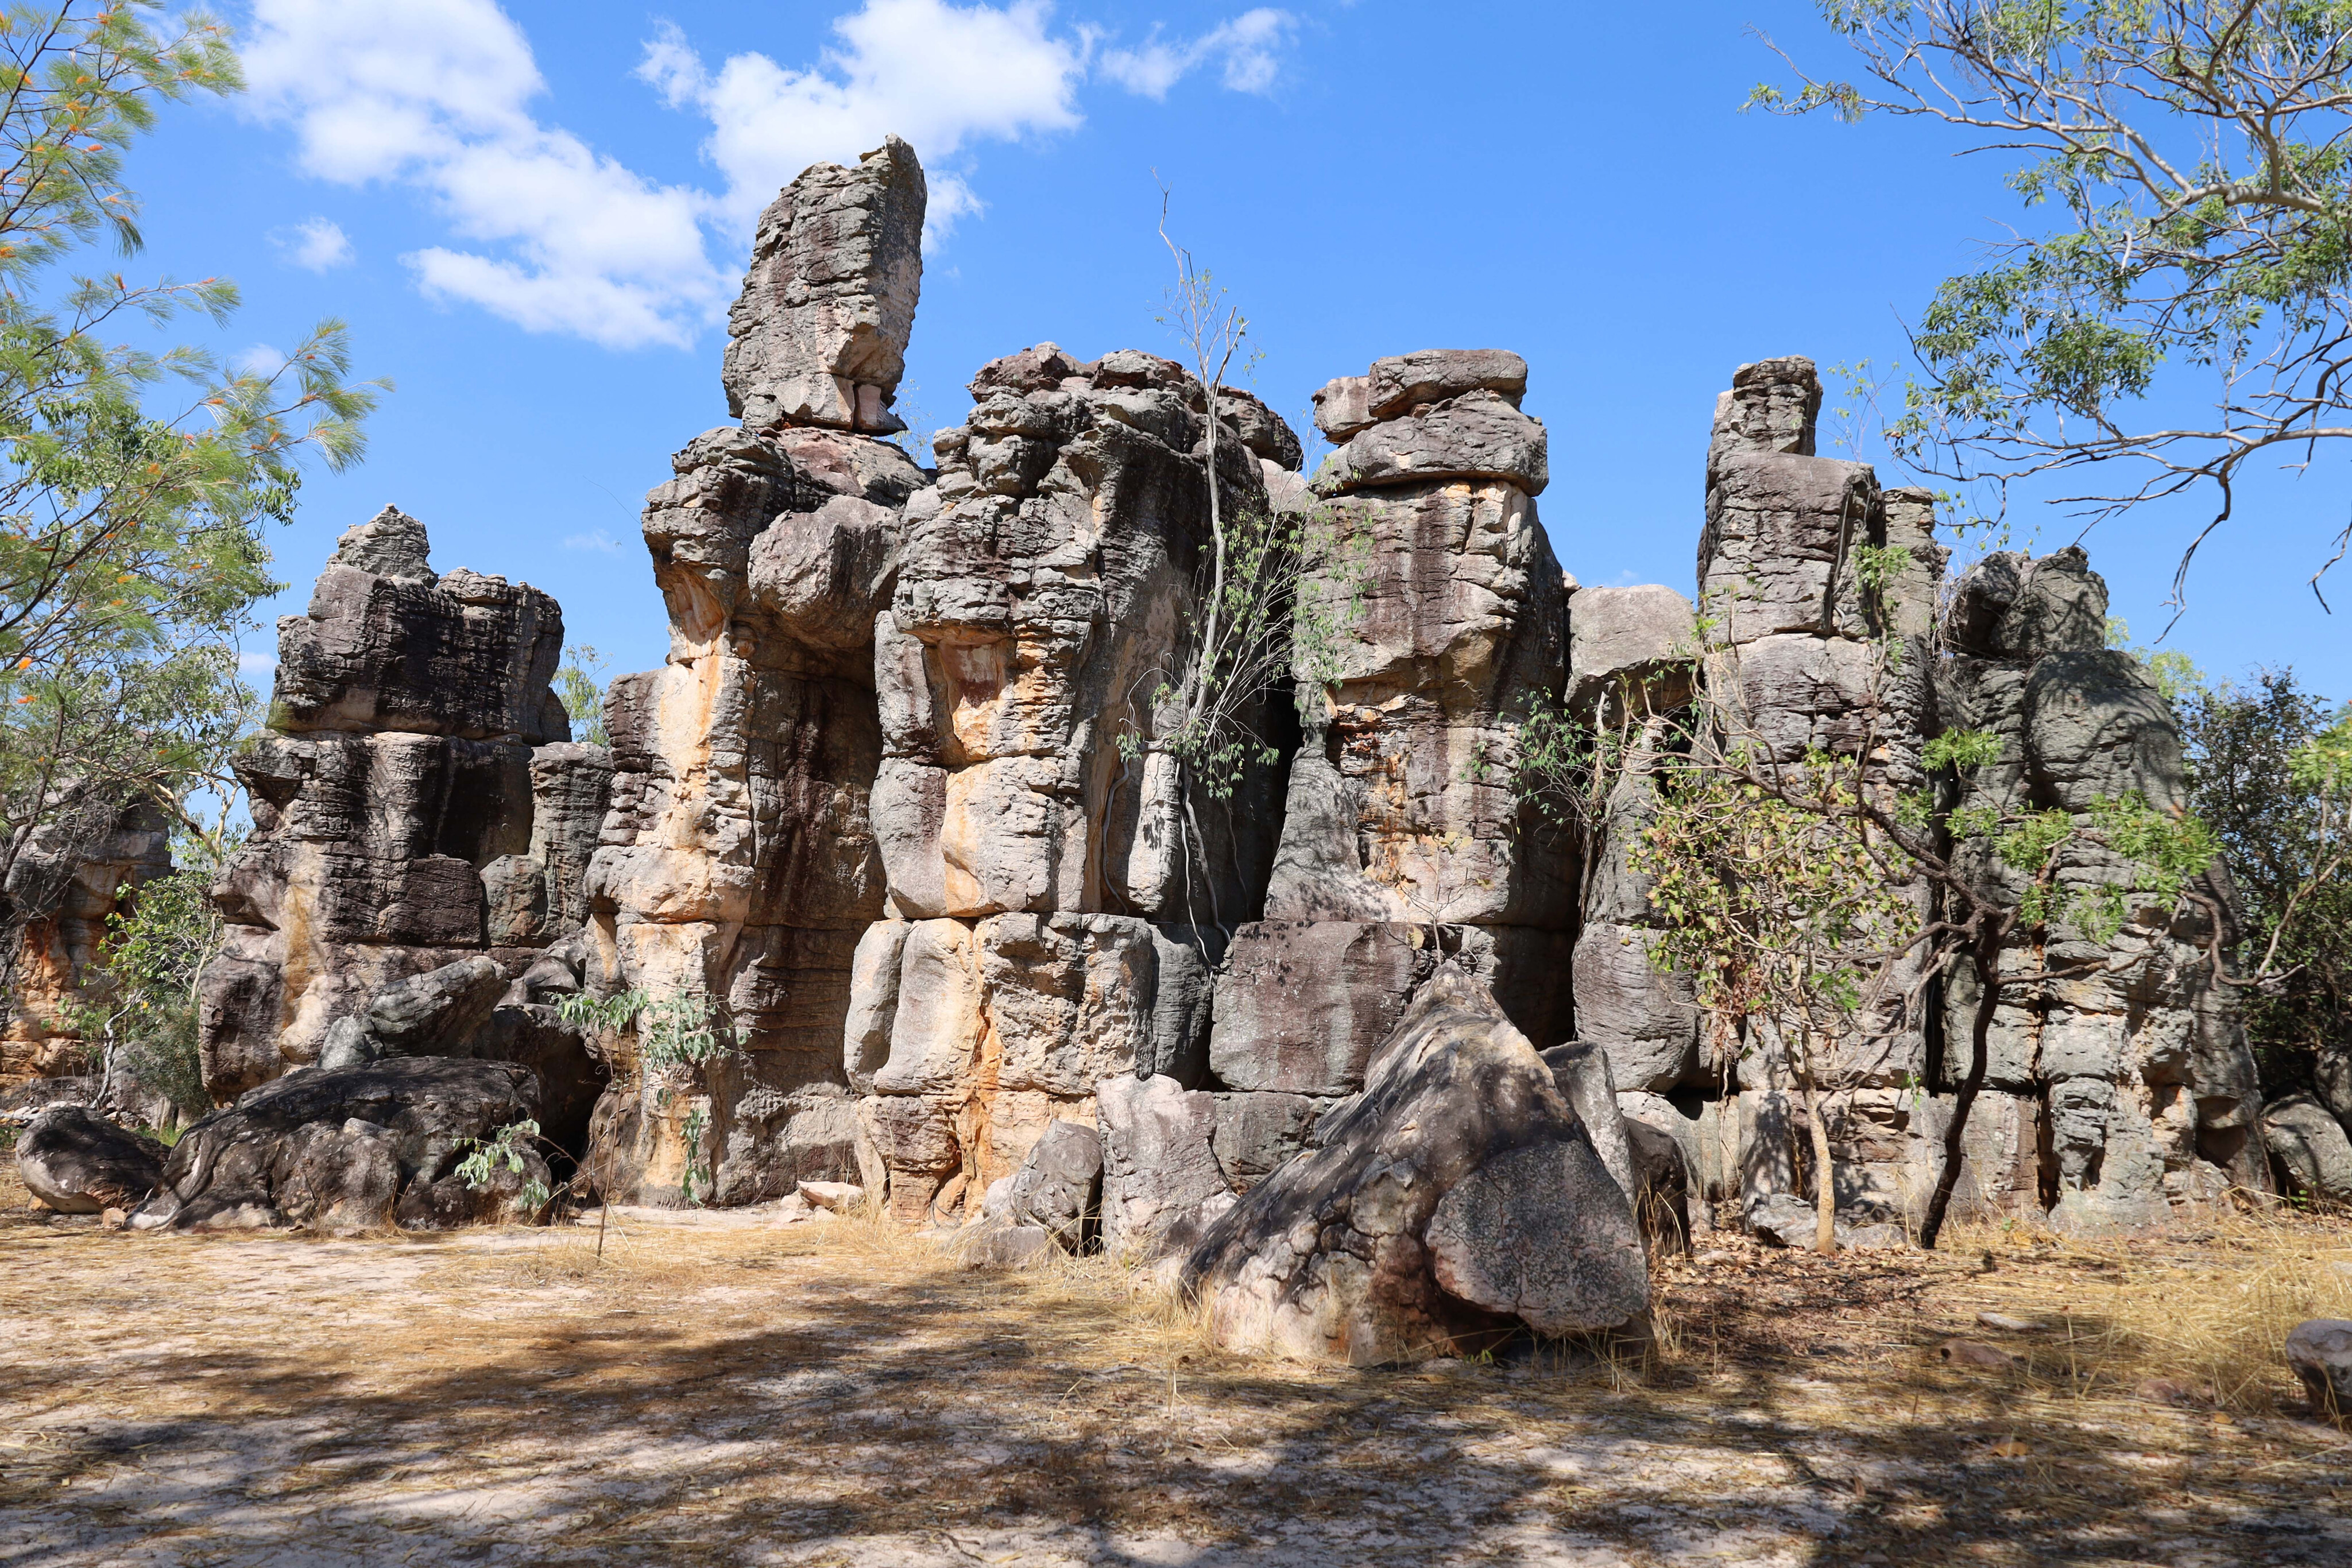 dcf61d03/rock formations in lost city litchfield national park jpg